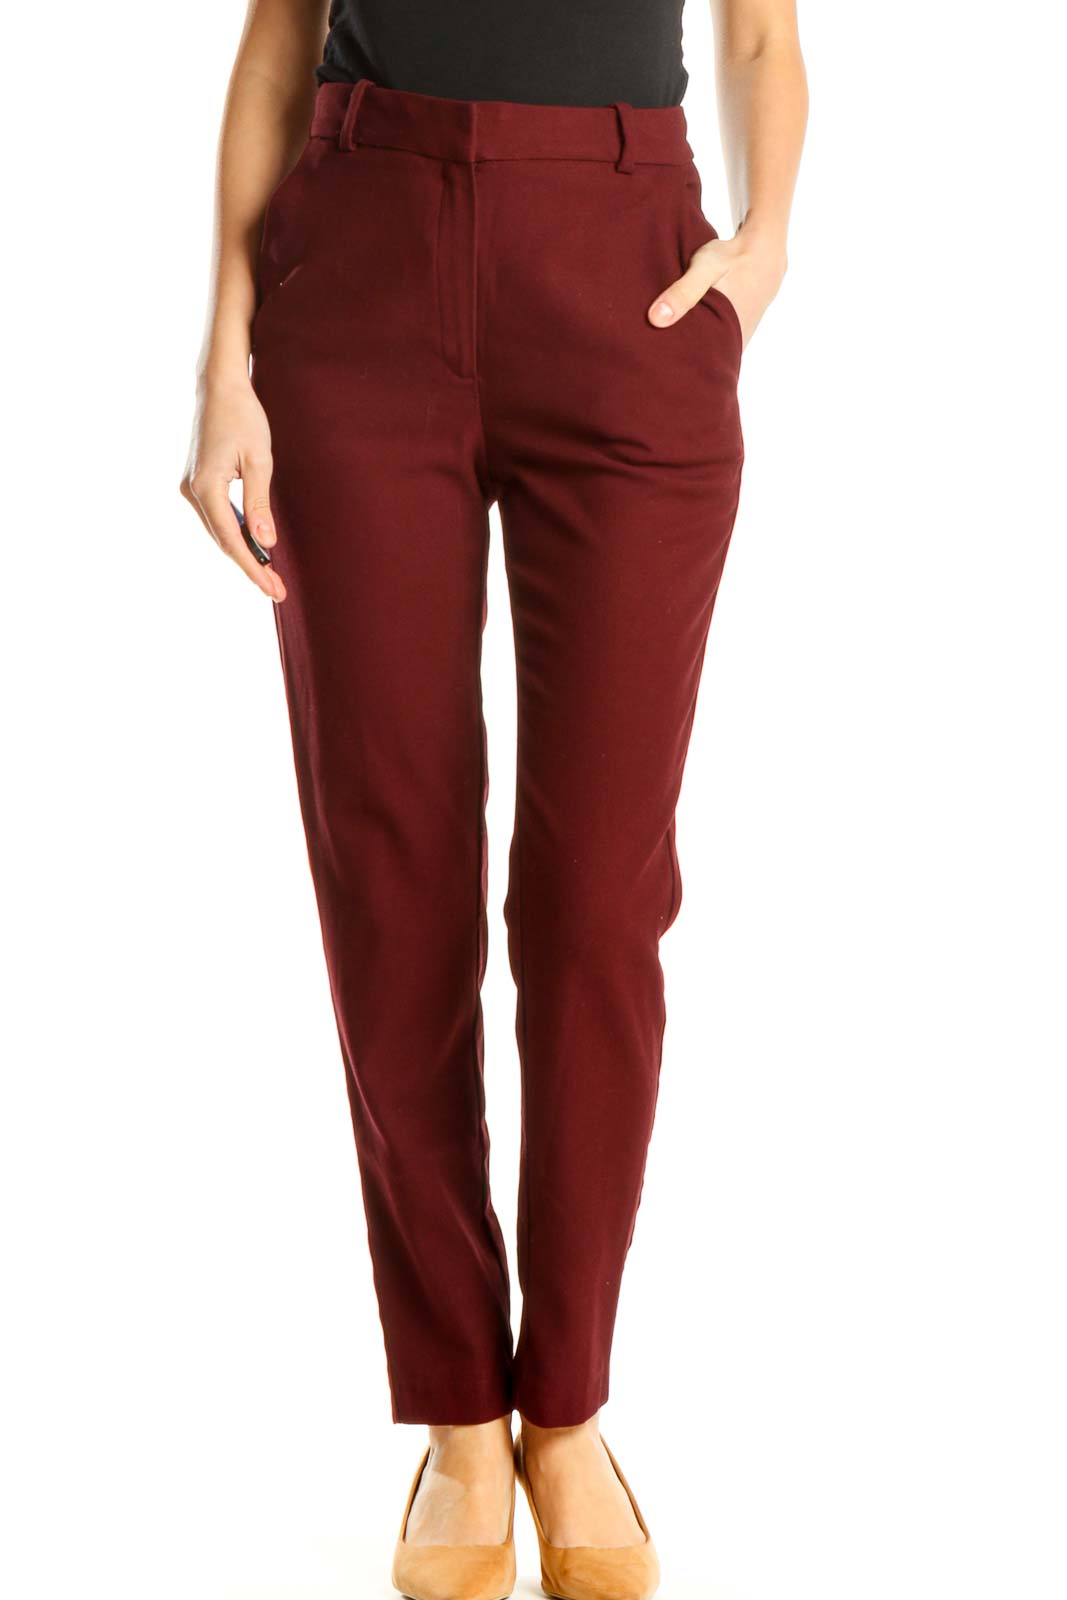 Red Casual Trousers Front